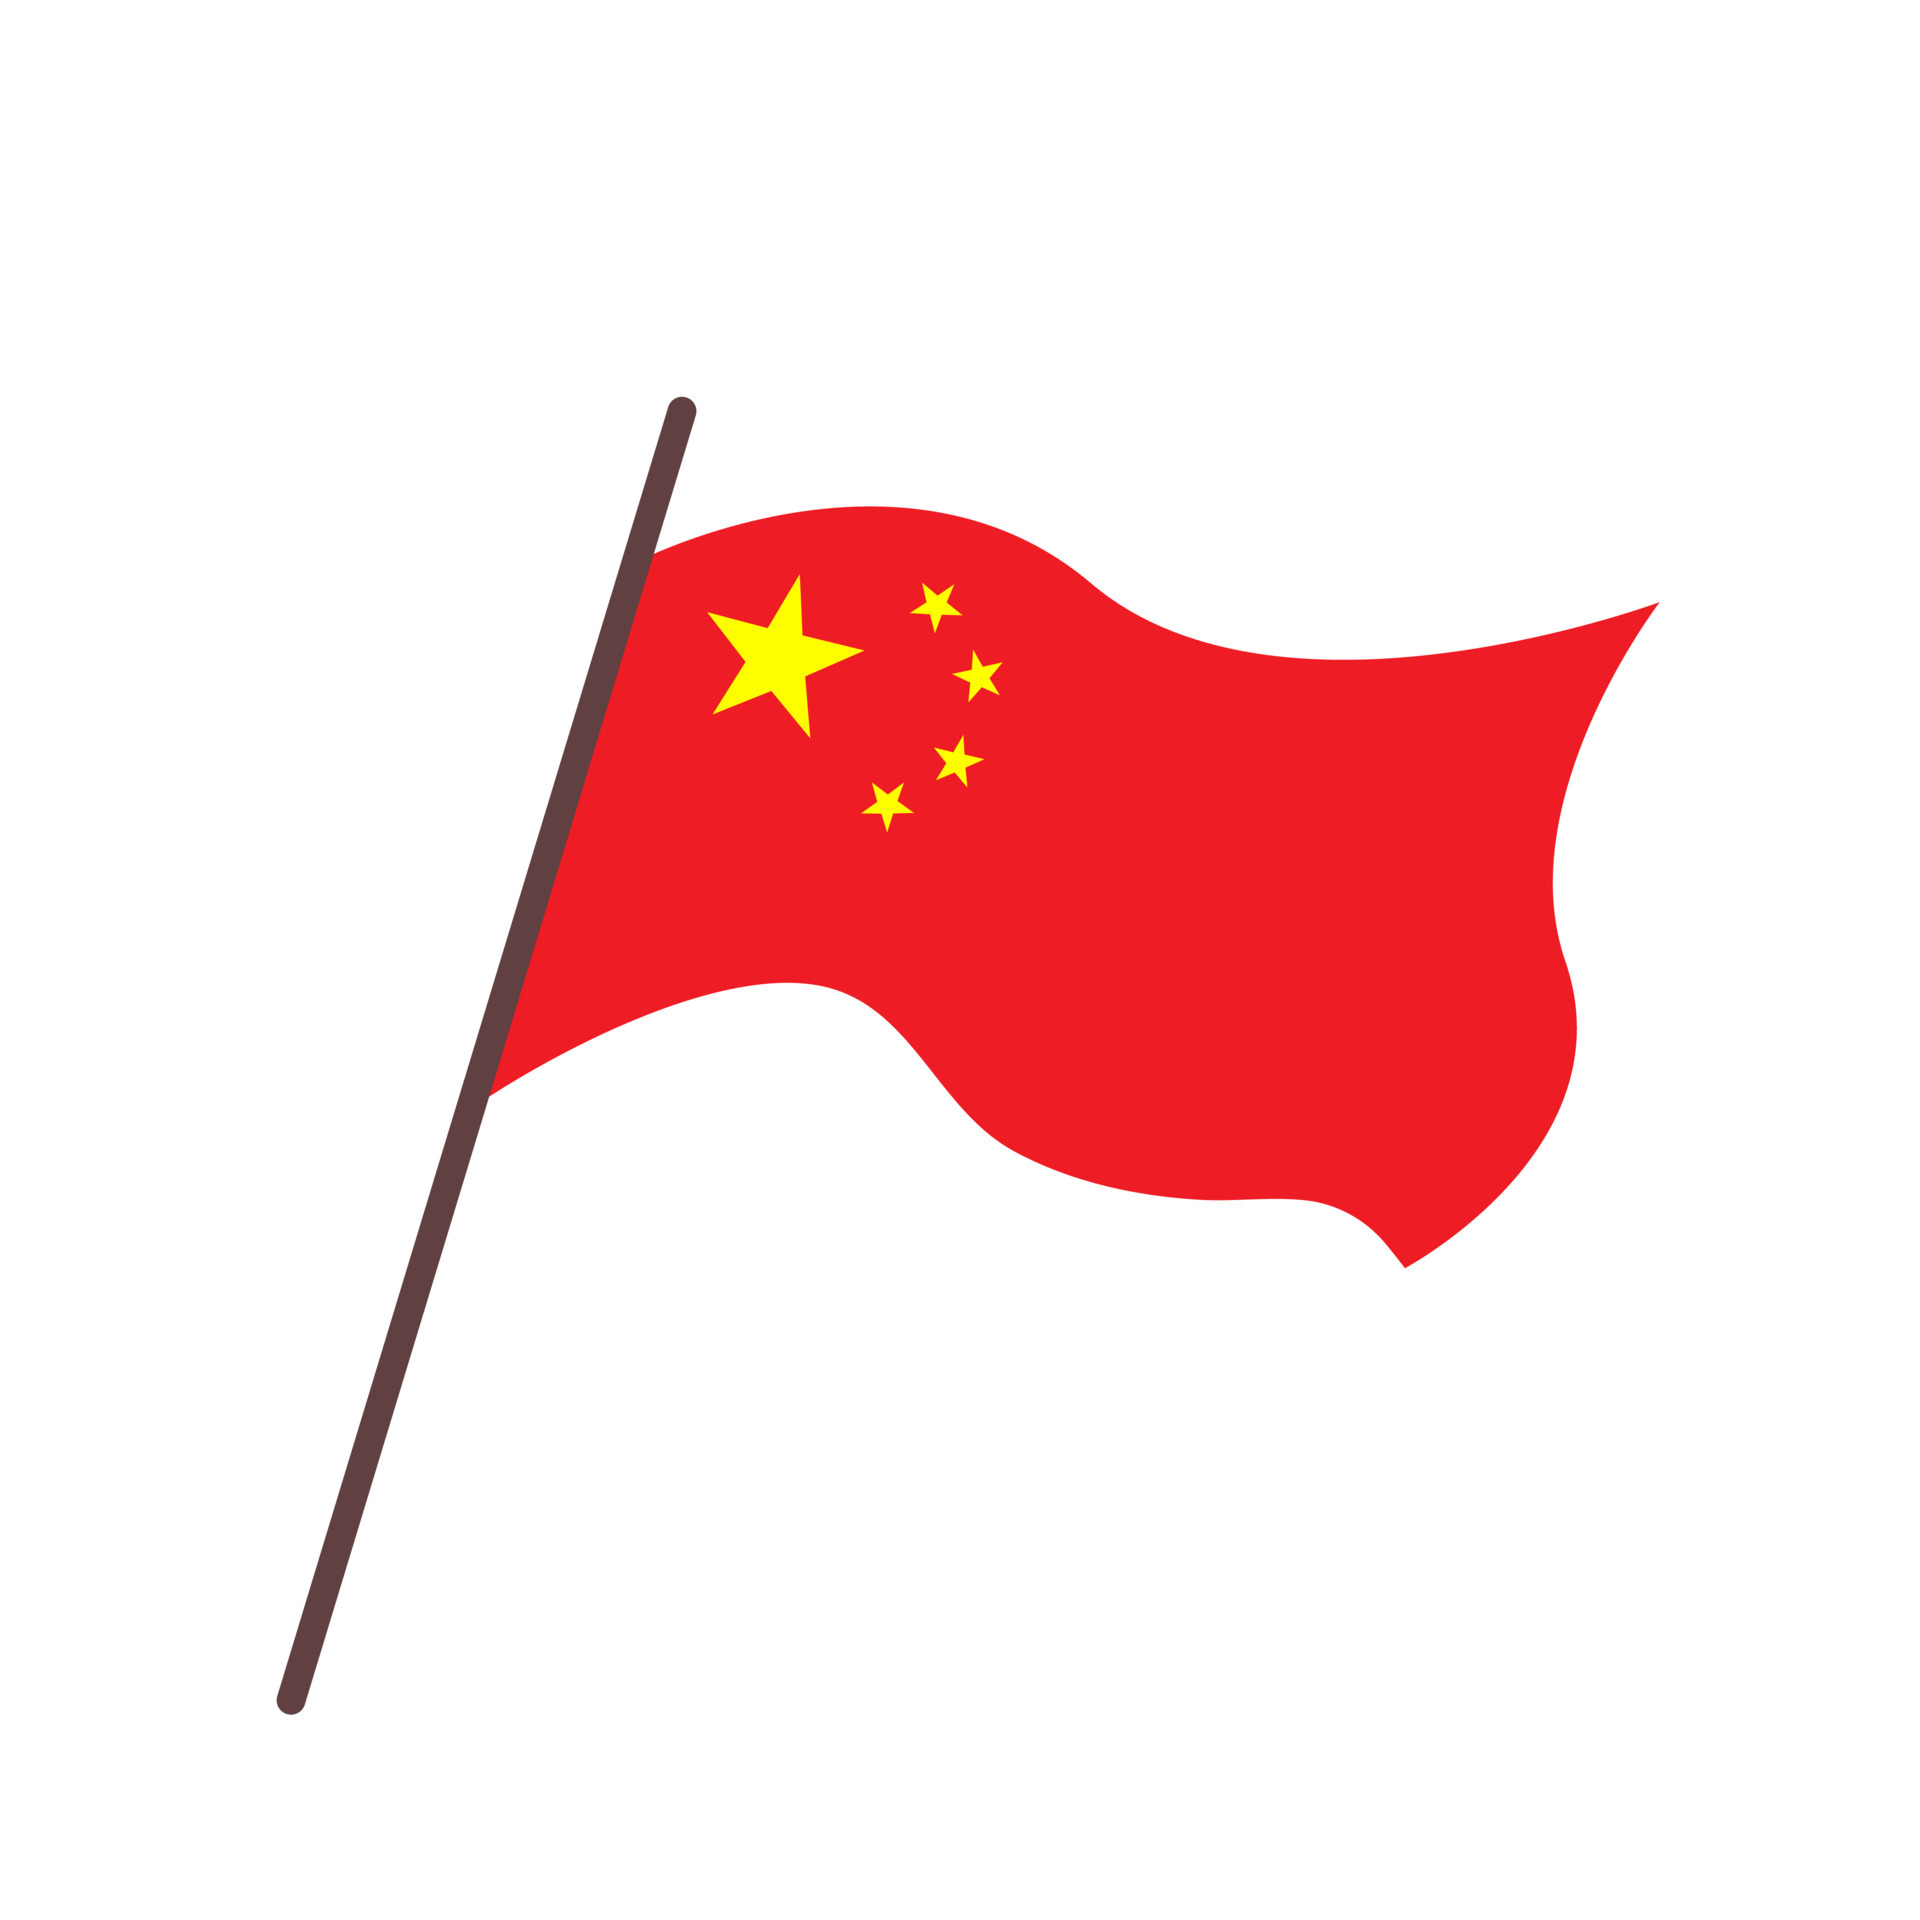 Waving flag of China, Peoples Republic of China, PRC. Isolated Chinese ...